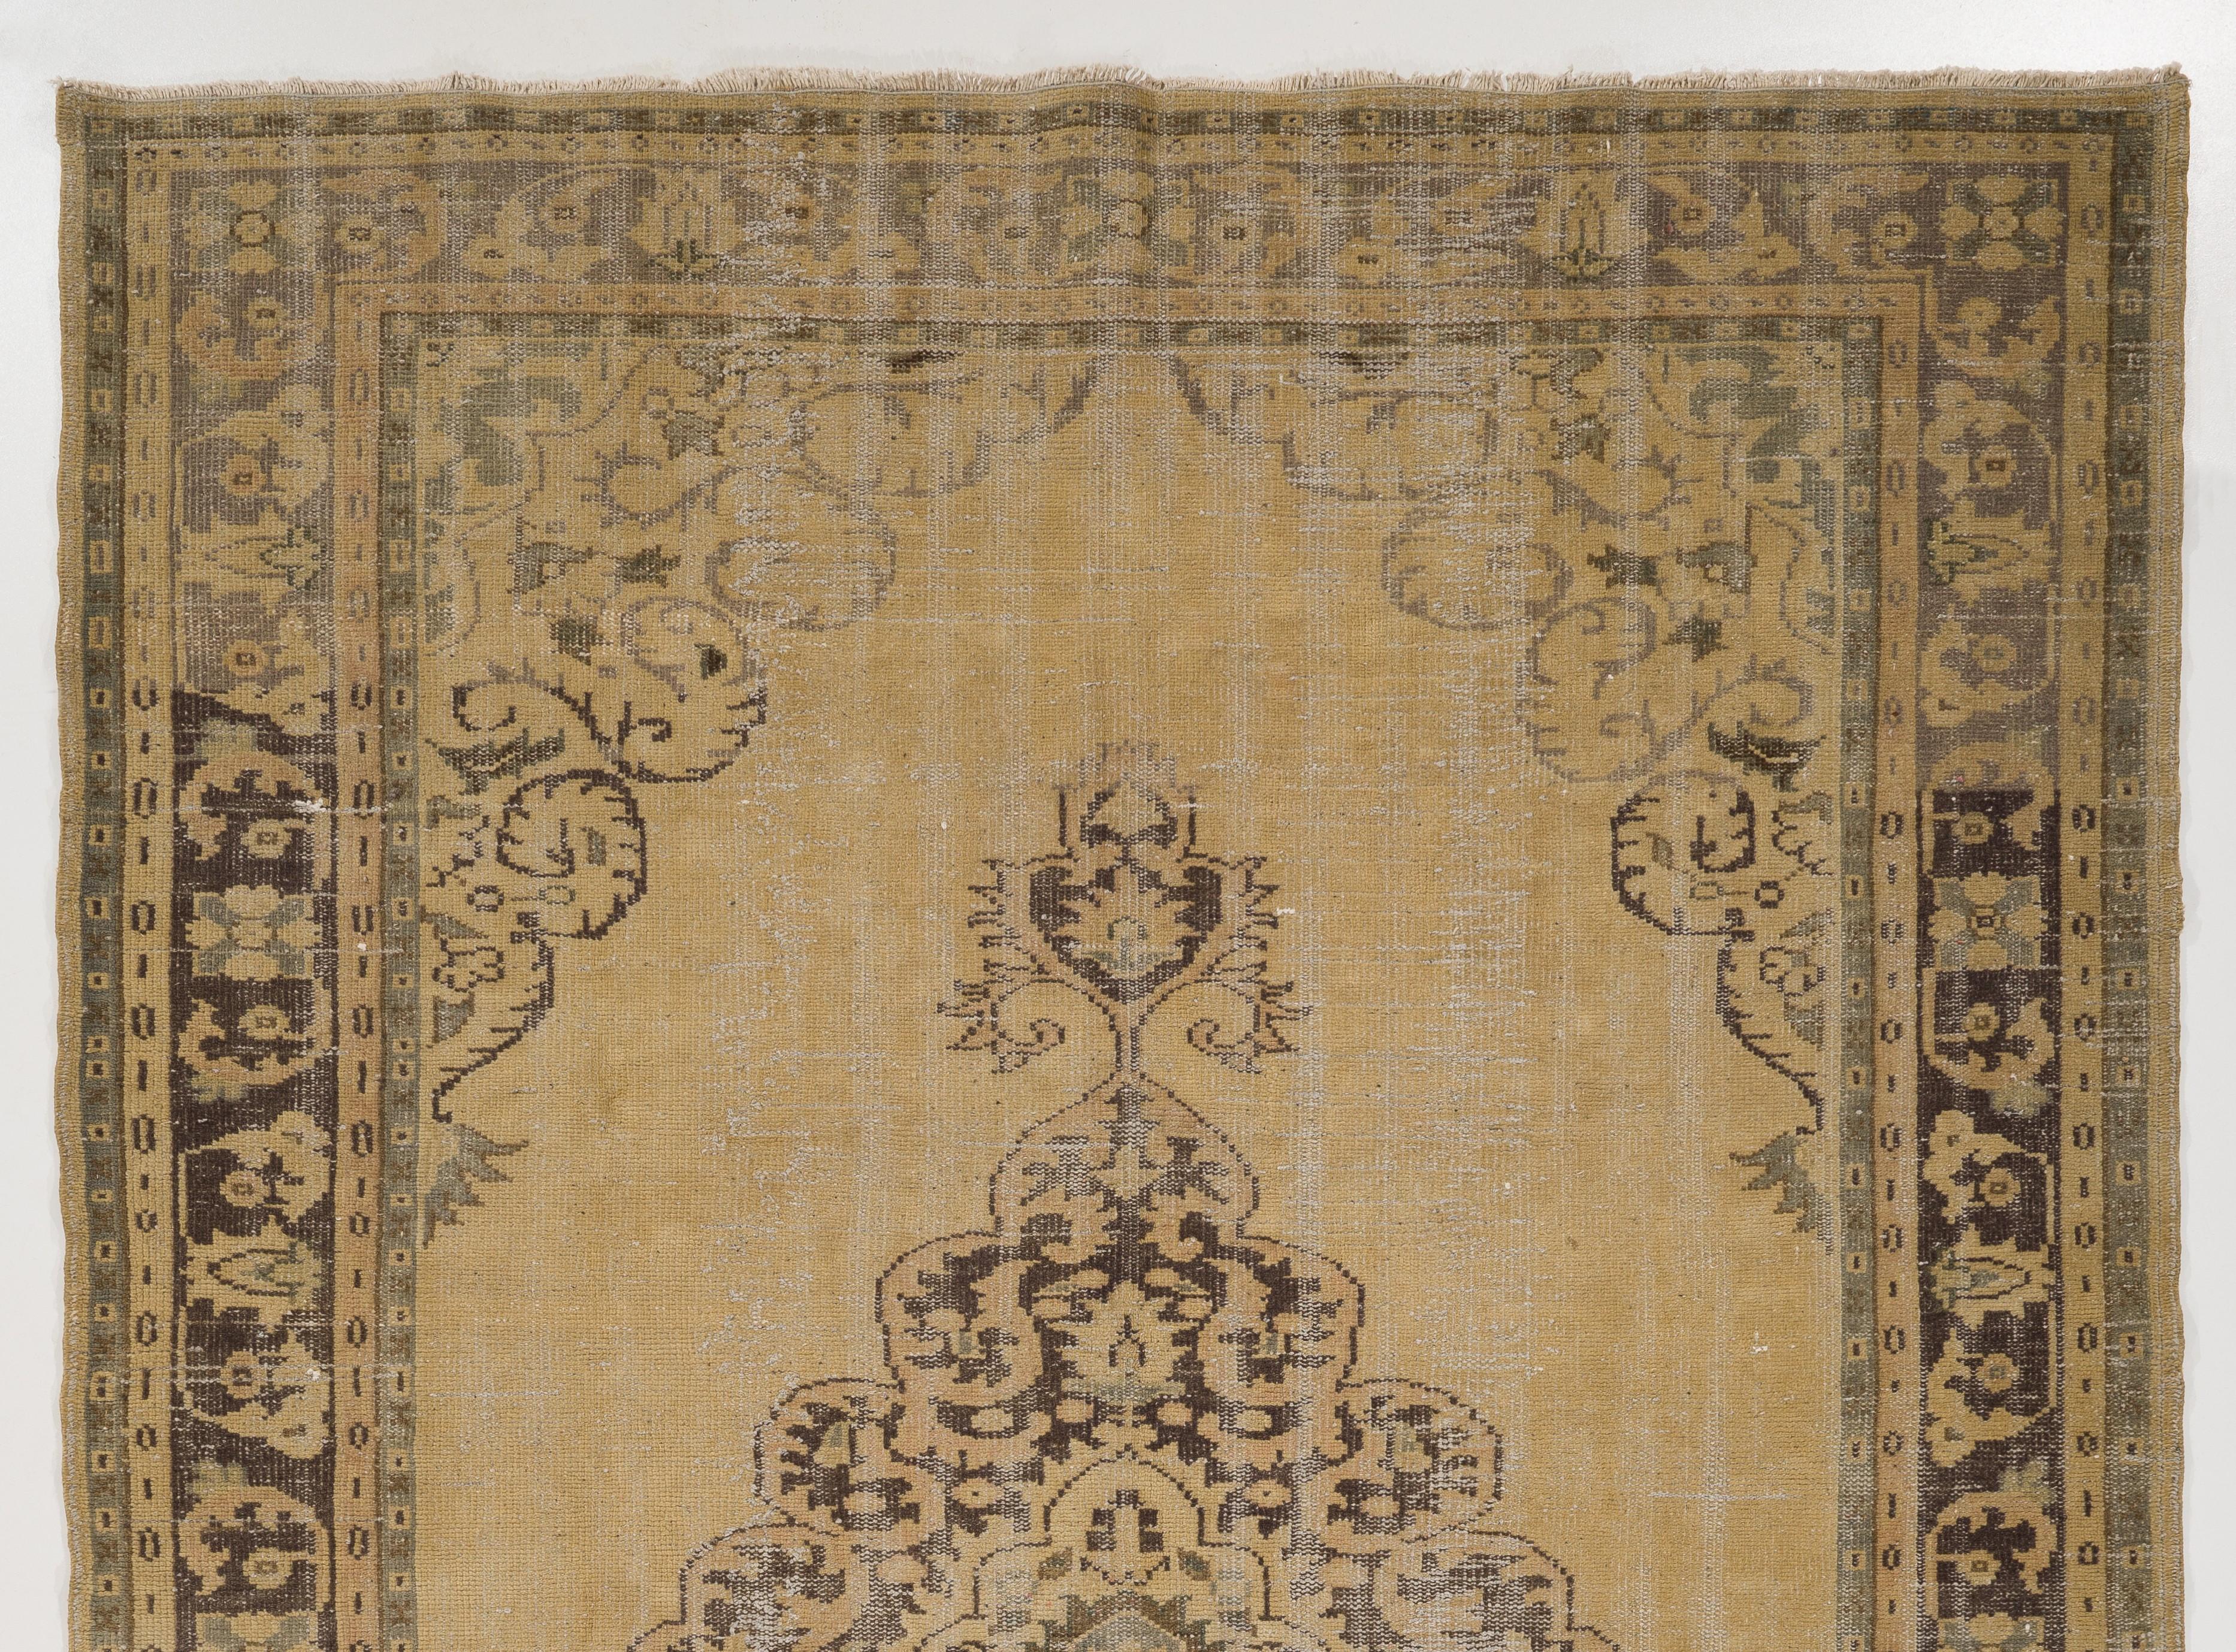 A finely hand knotted rug from West Anatolia with soft colors and low wool pile on cotton foundation. The rug is in very good condition and washed professionally. It is heavy and lays flat on the floor, suitable for both residential and commercial